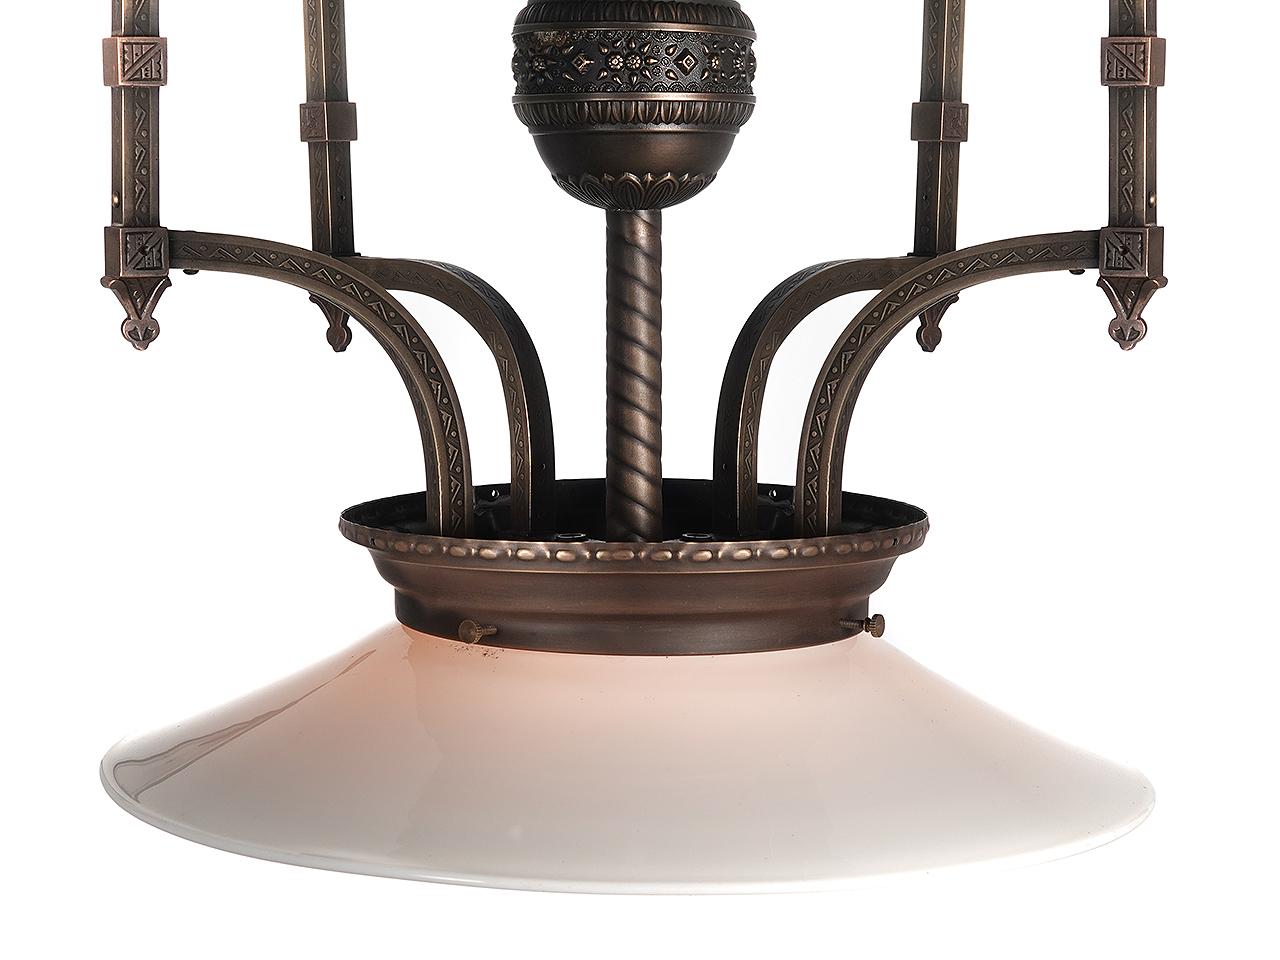 American Early Railroad Center Lamp For Sale